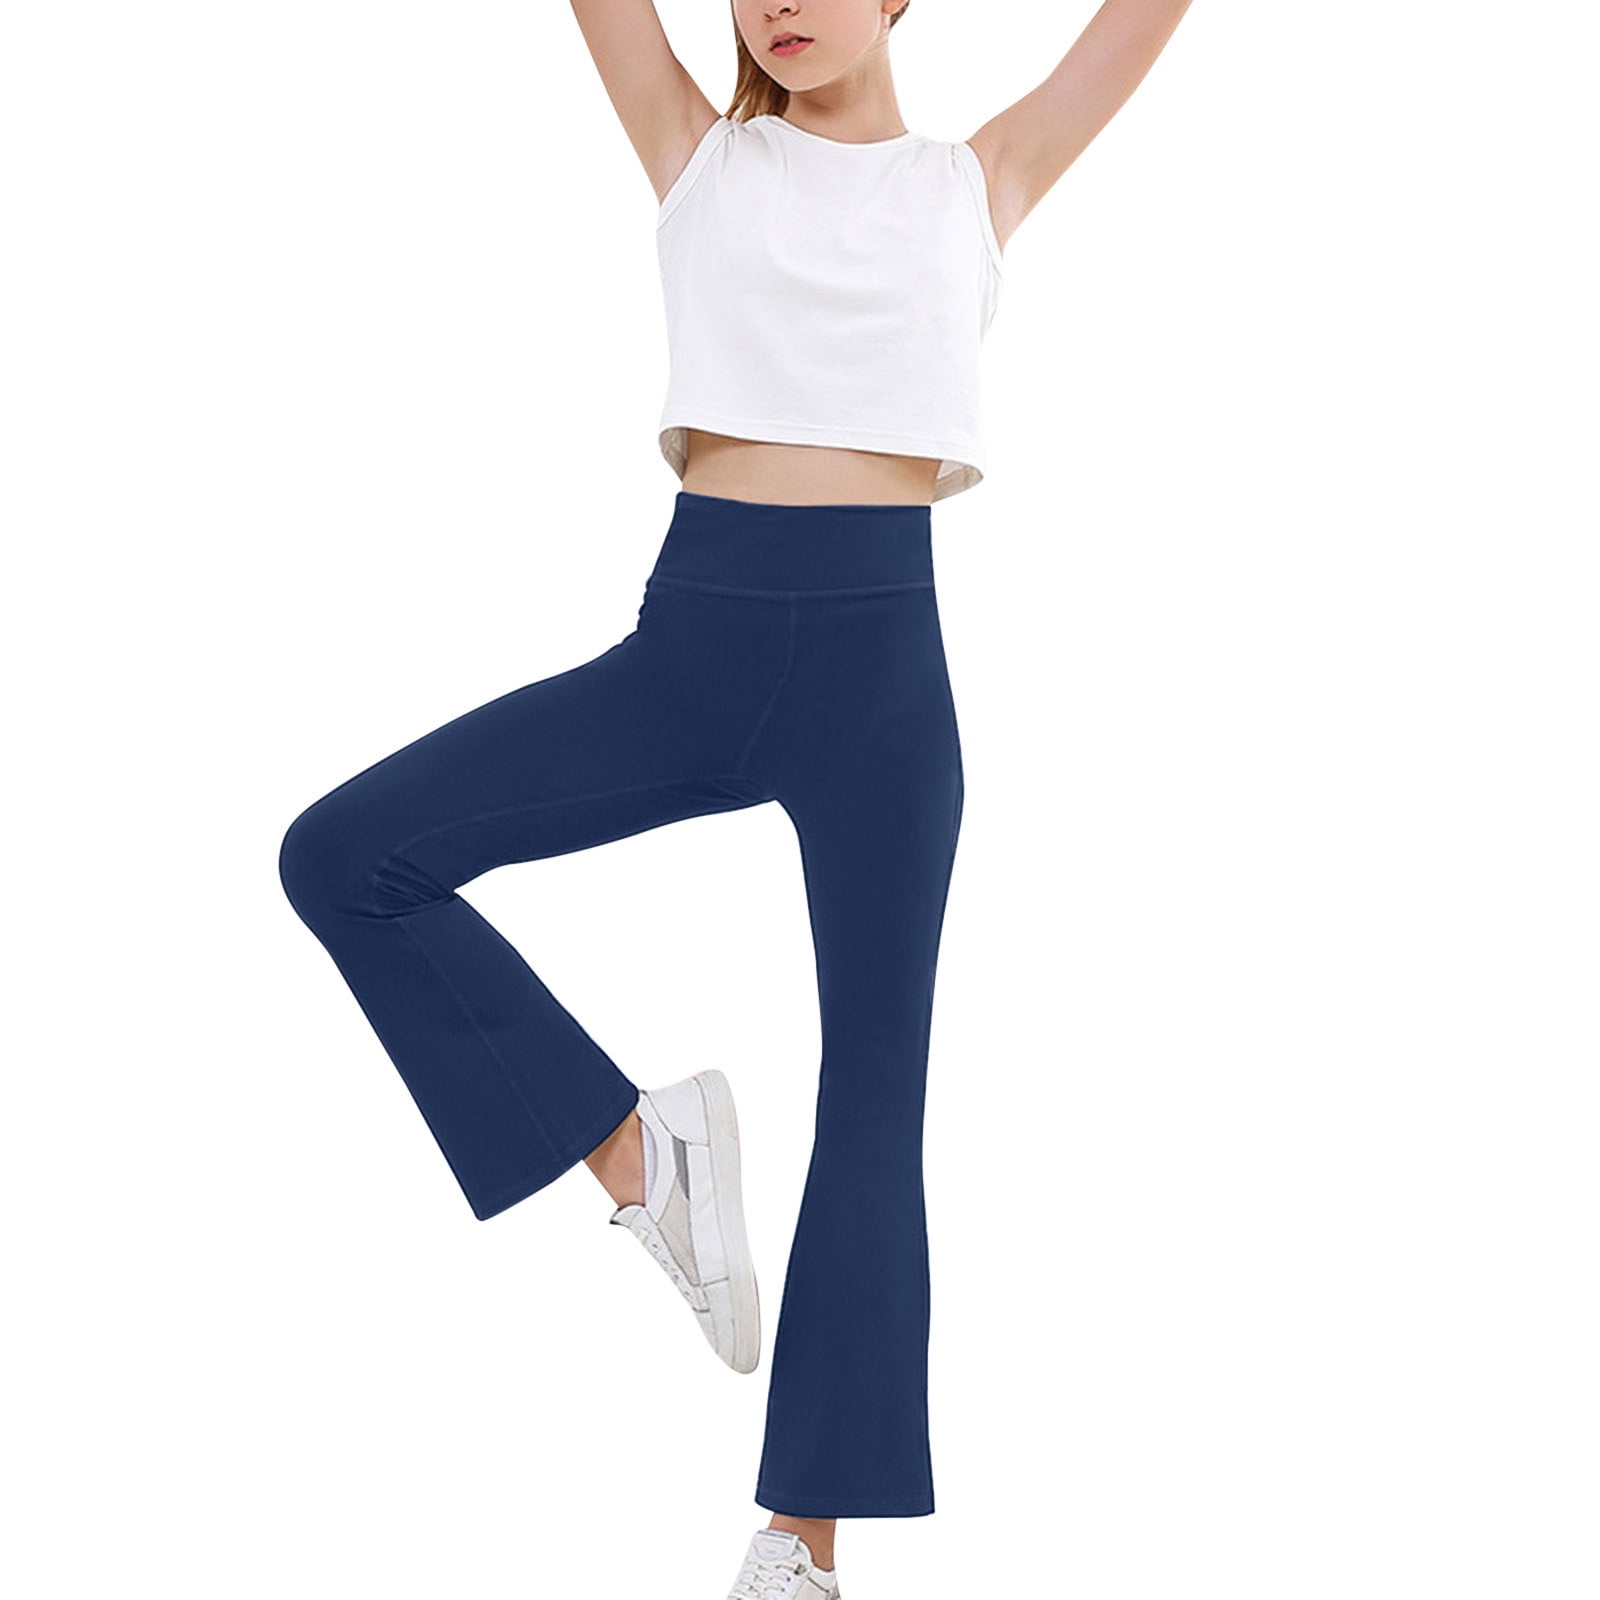 KaLI_store Pants for Teen Girls Girls Yoga Pants Cross High Waisted Flare  Pants Casual Activewear Kids Bell Bottoms Pants Navy,13-14 Years 